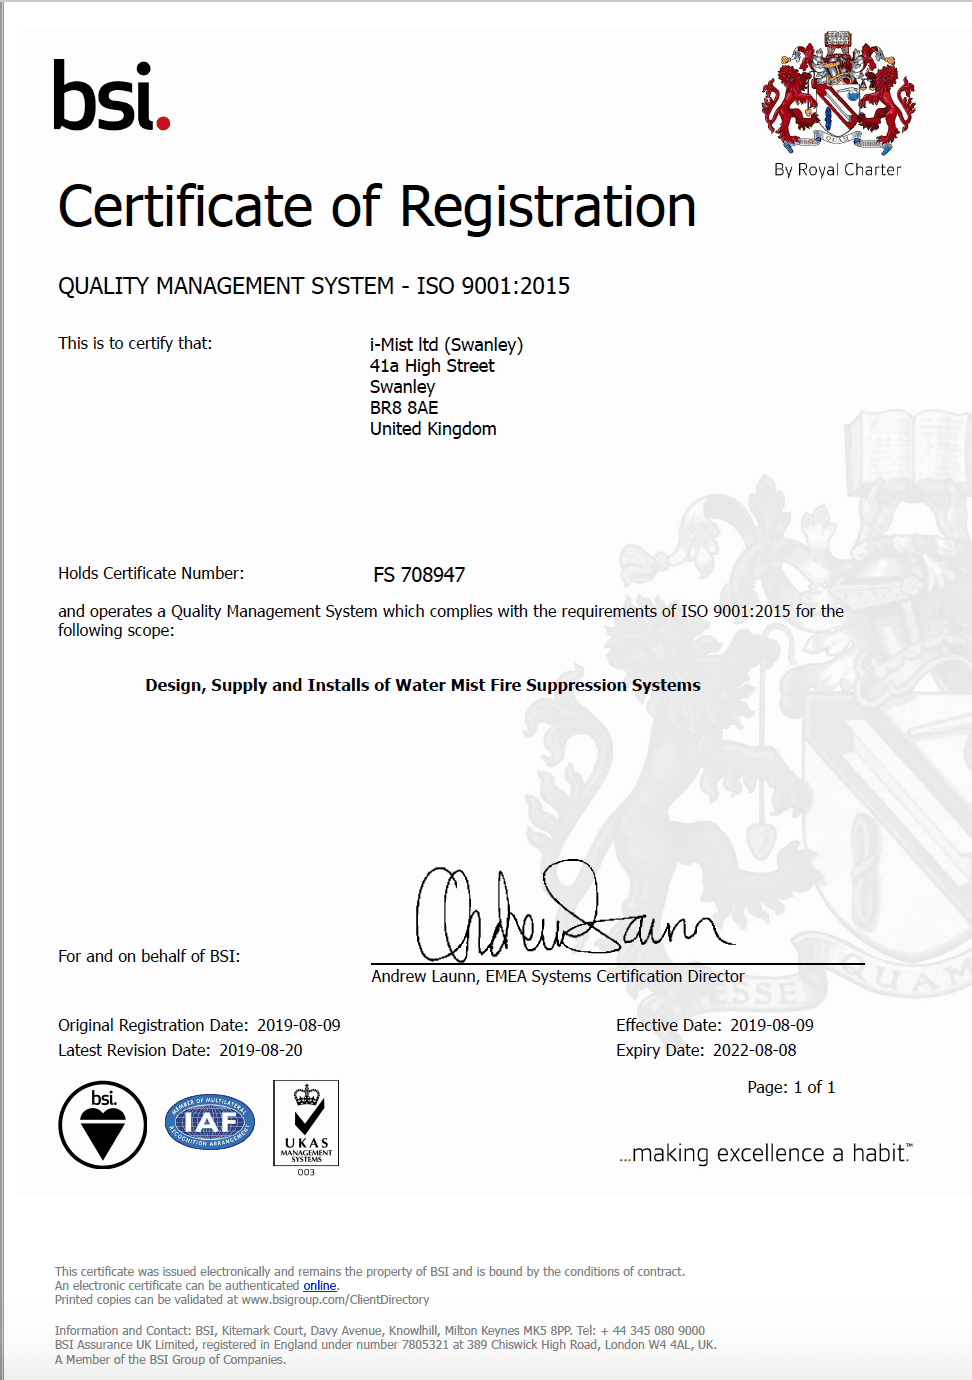 BSI certificate of registration that iMist was awarded